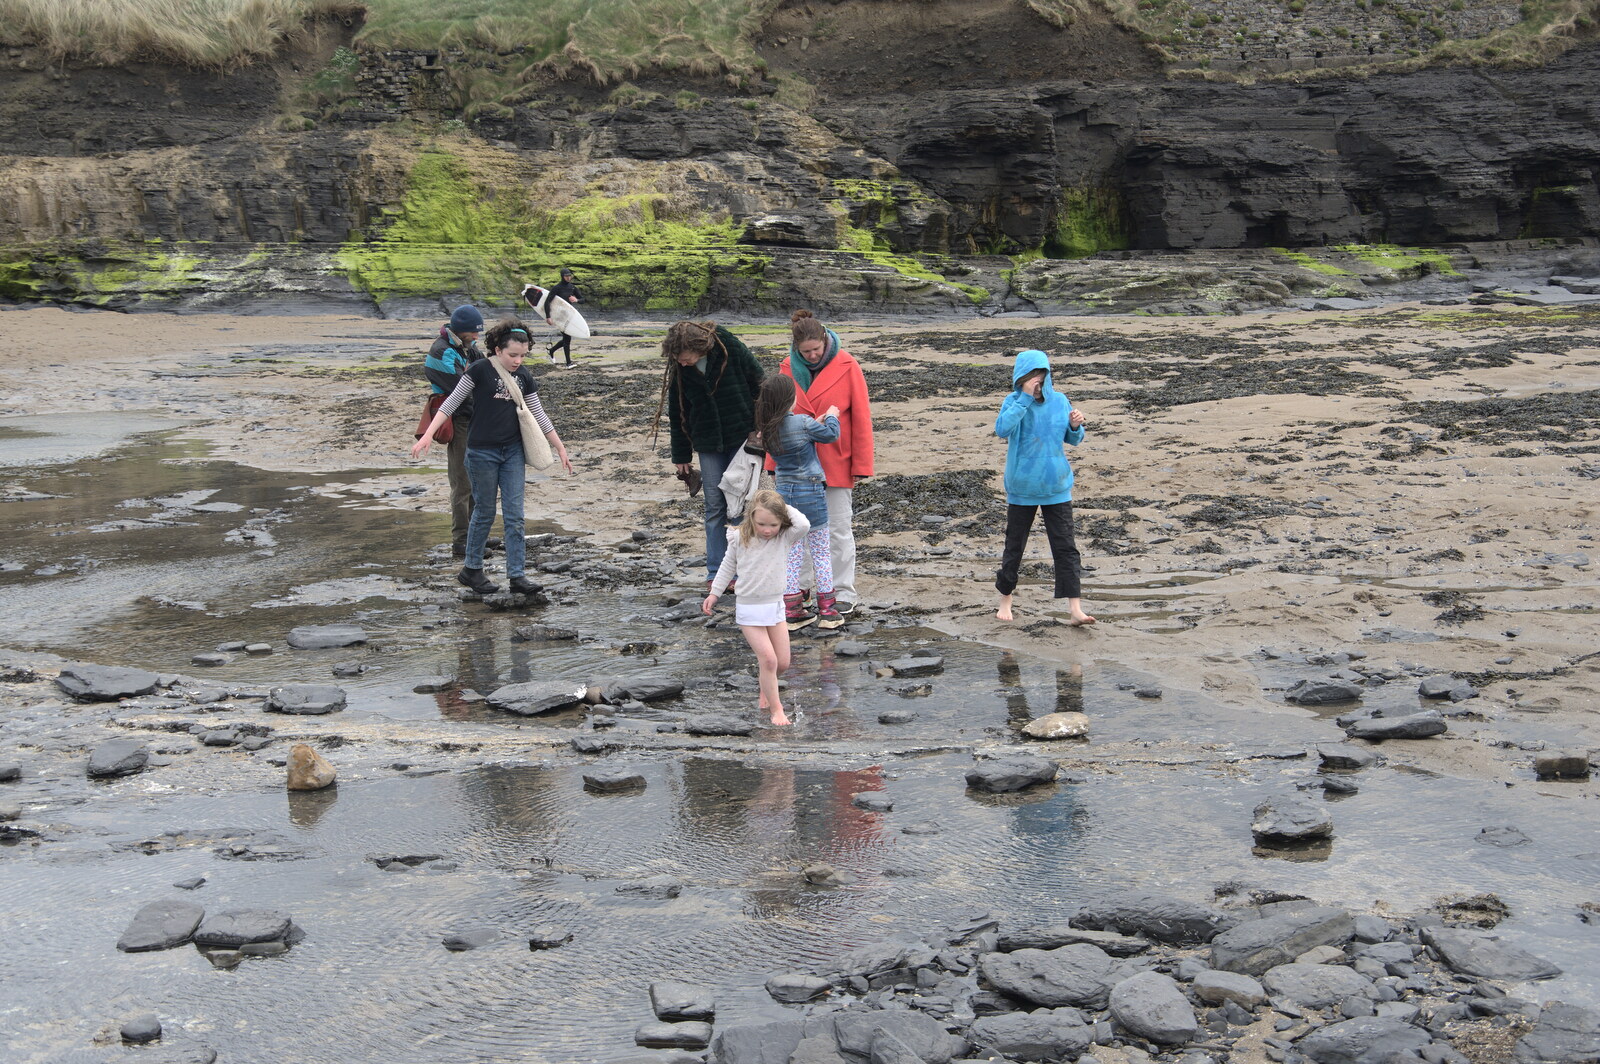 The group on the beach from Manorhamilton and Bundoran, Leitrim and Donegal, Ireland - 16th April 2022